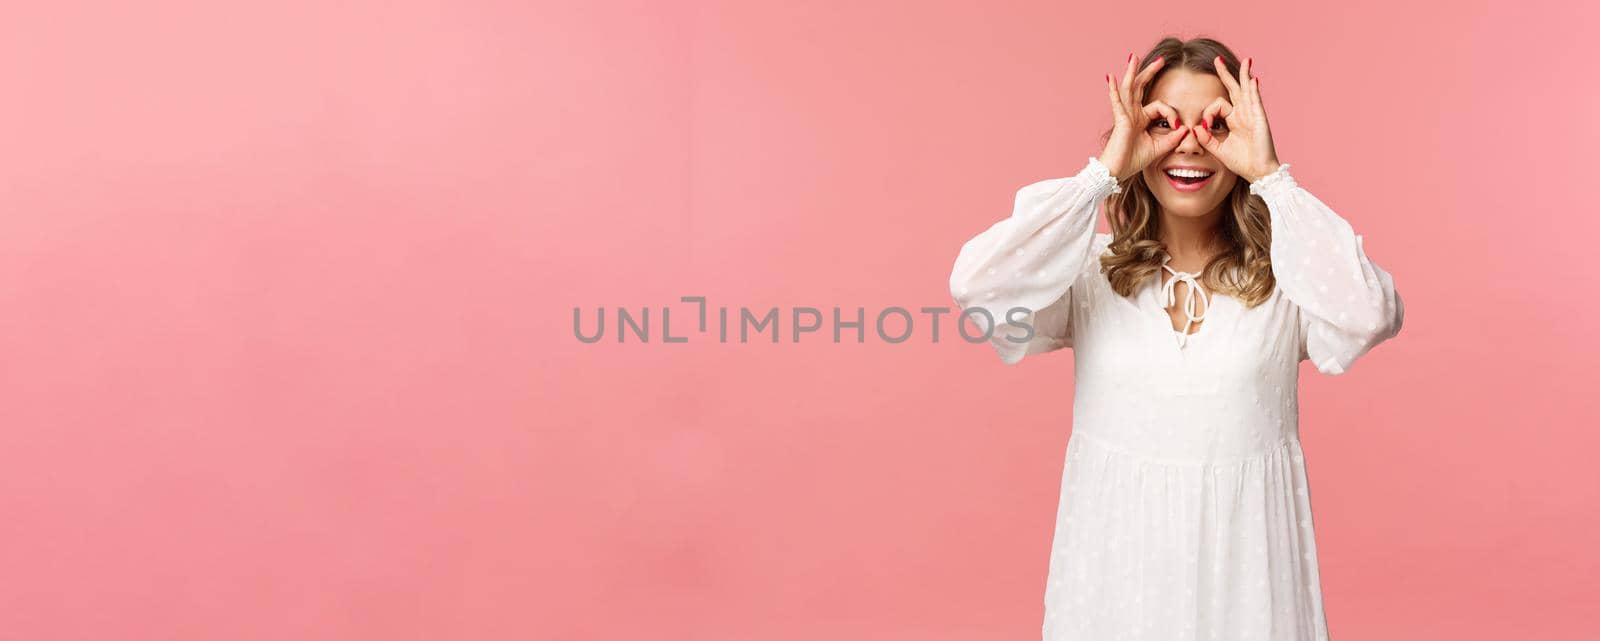 Portrait of dreamy cute and funny young blond girl seeing something interesting, looking from okay signs as making glass-mask with fingers over eyes, smiling amused, pink background by Benzoix